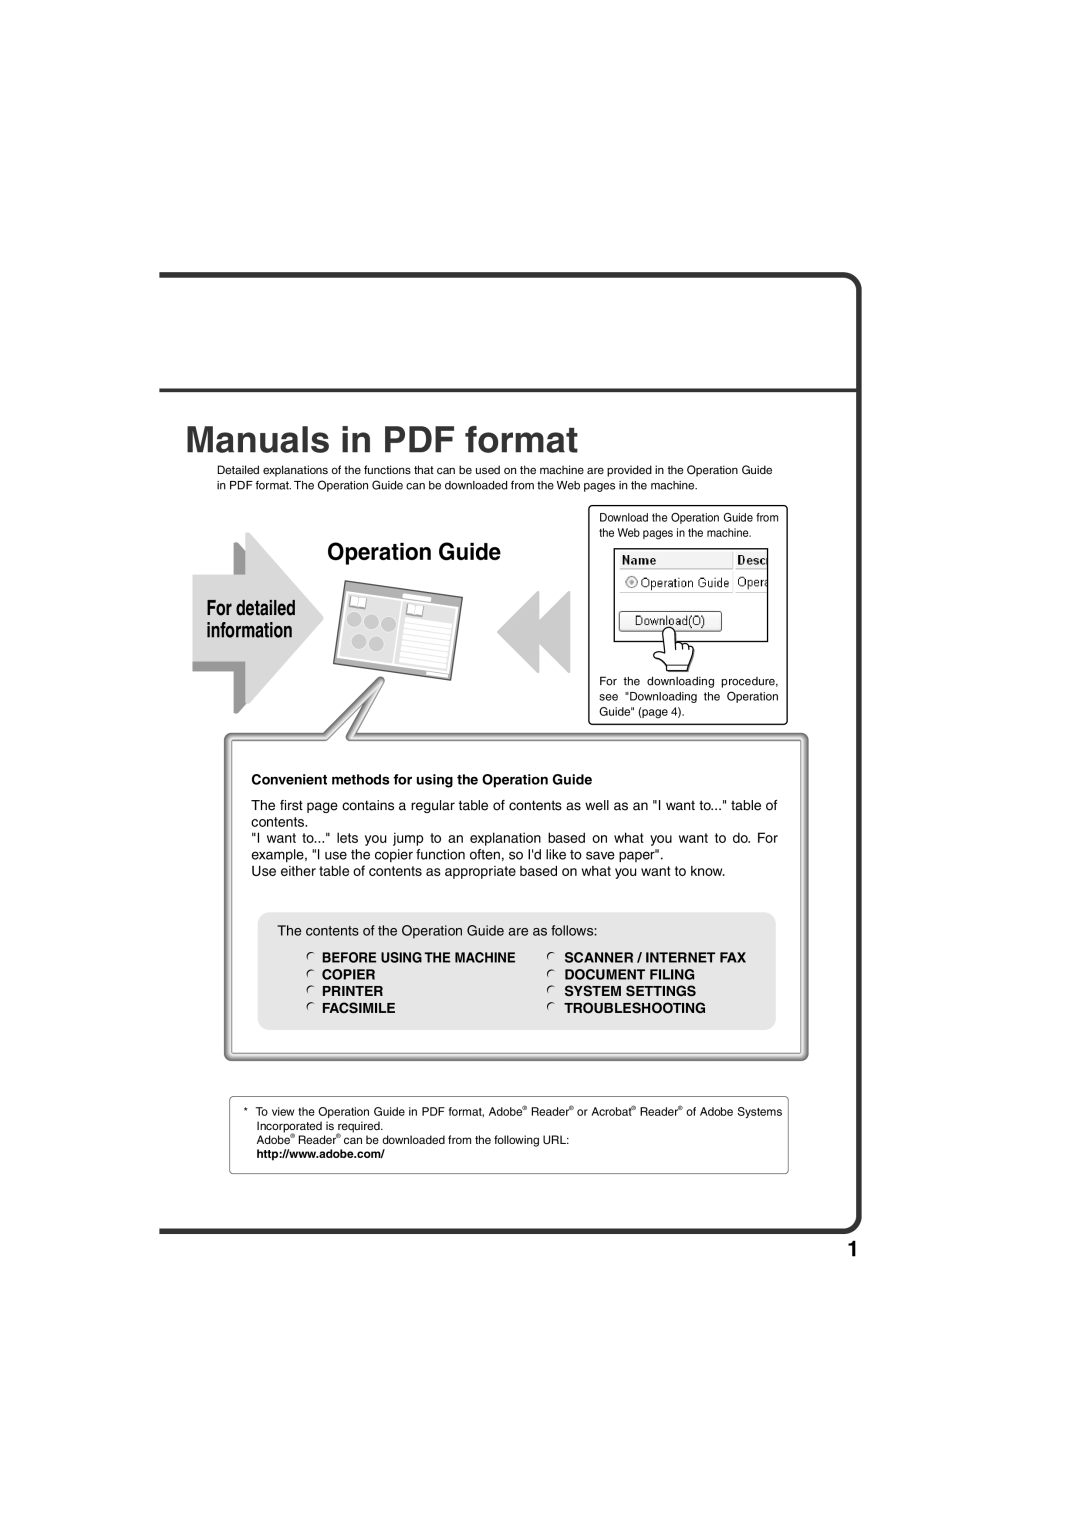 Sharp TINSE4377FCZZ Manuals in PDF format, Convenient methods for using the Operation Guide, Before Using The Machine 